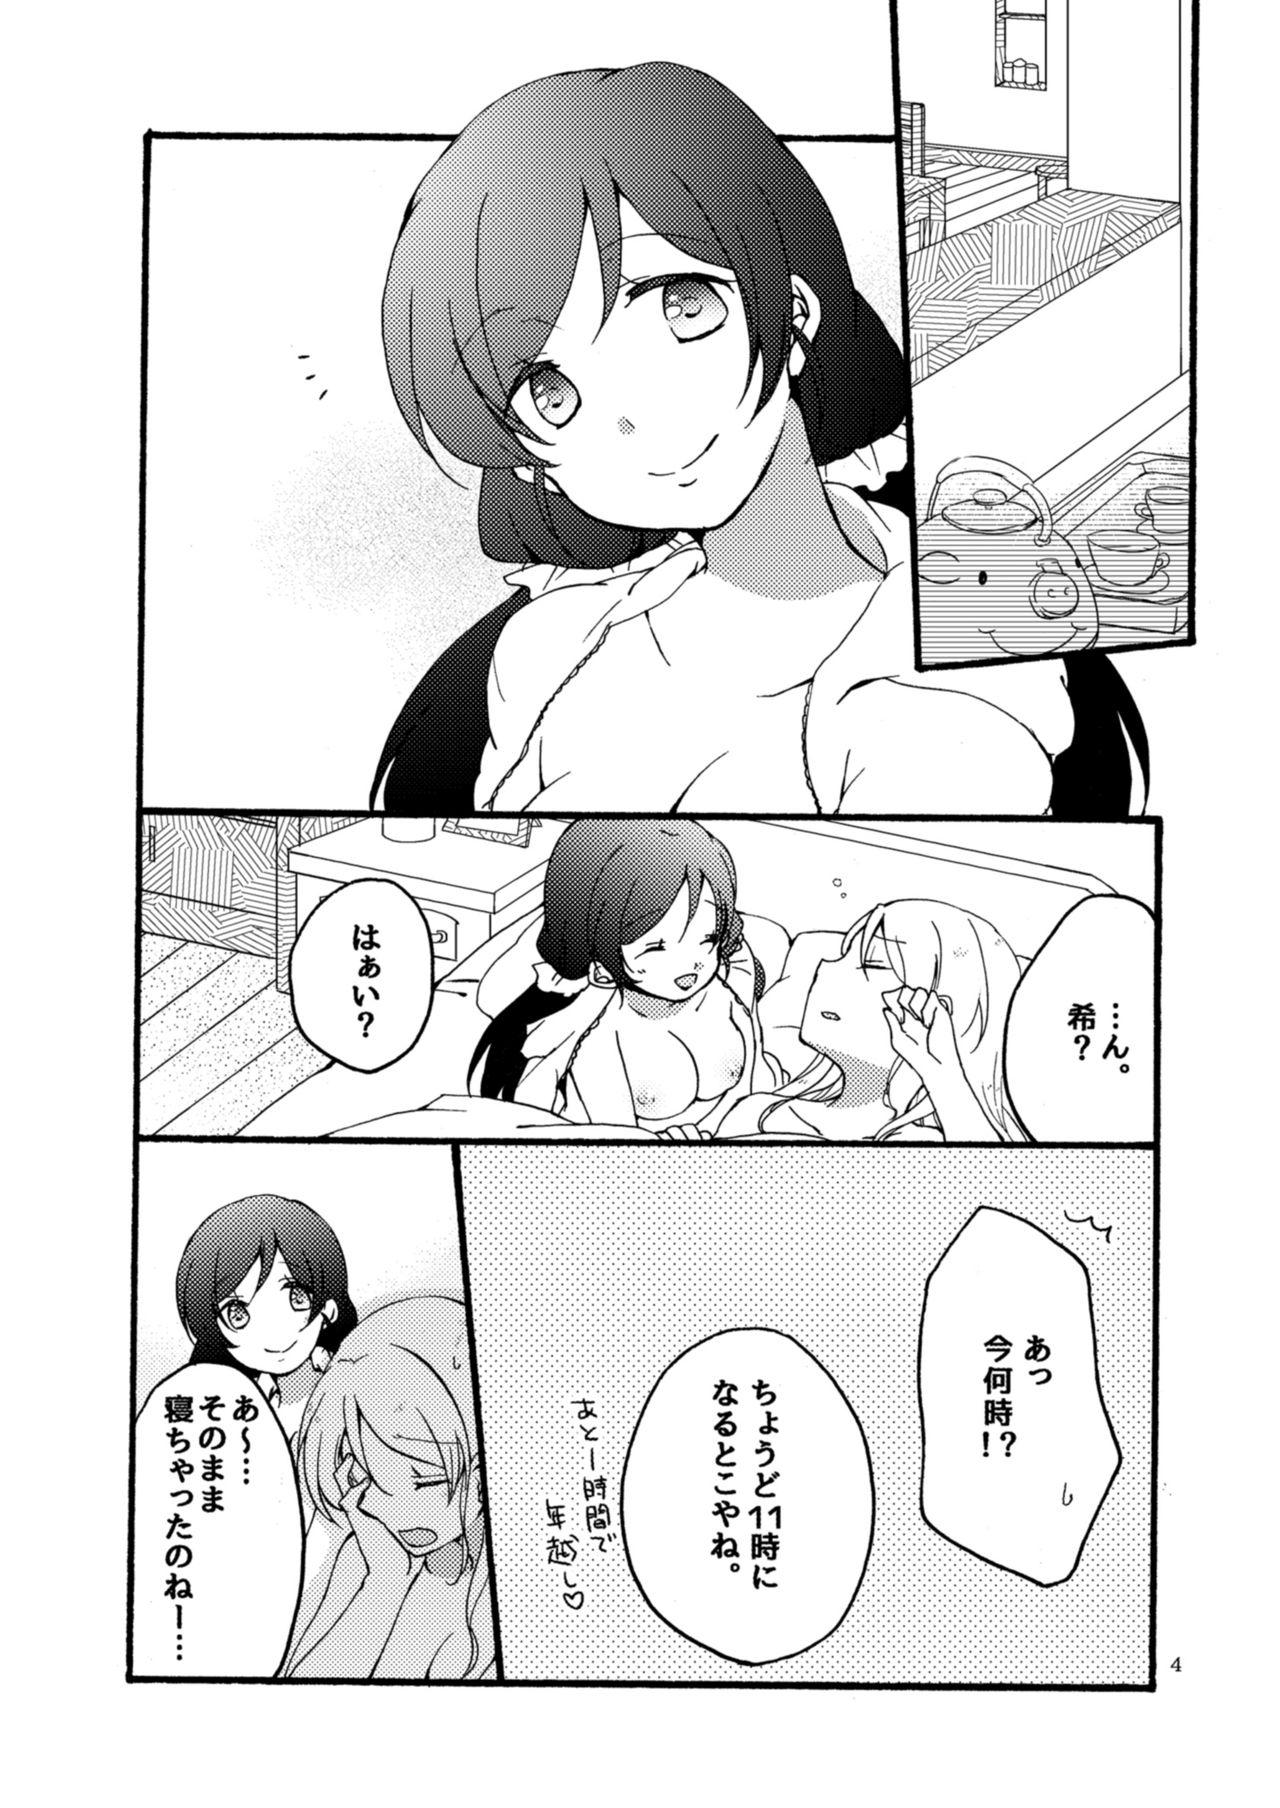 Mulher 12/31 - Love live Flaquita - Page 4